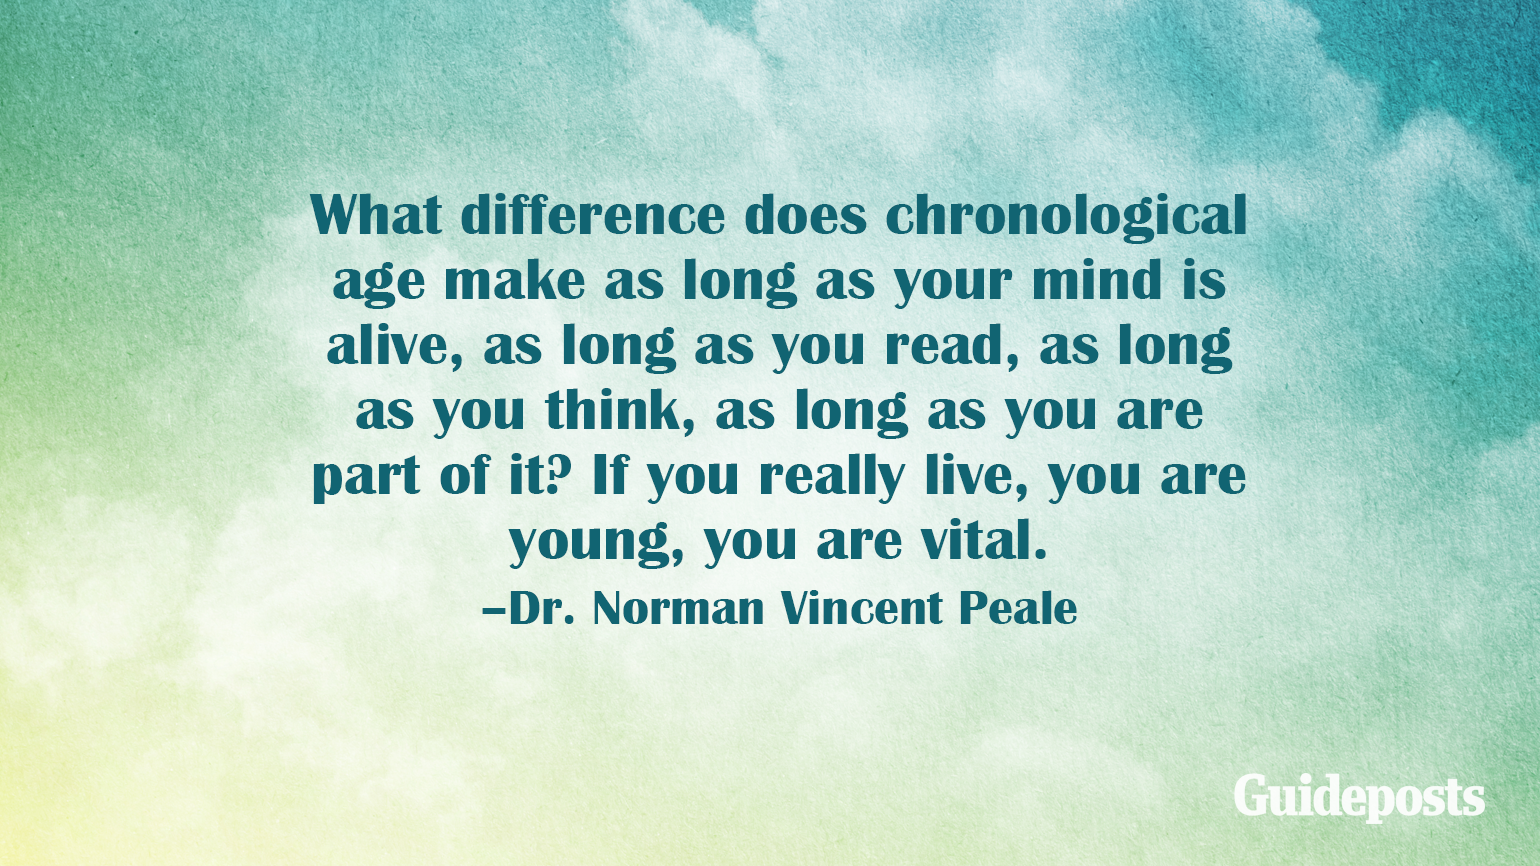 What difference does chronological age make as long as your mind is alive, as long as you read, as long as you think, as long as you are part of it? If you really live, you are young, you are vital. –Dr. Norman Vincent Peale